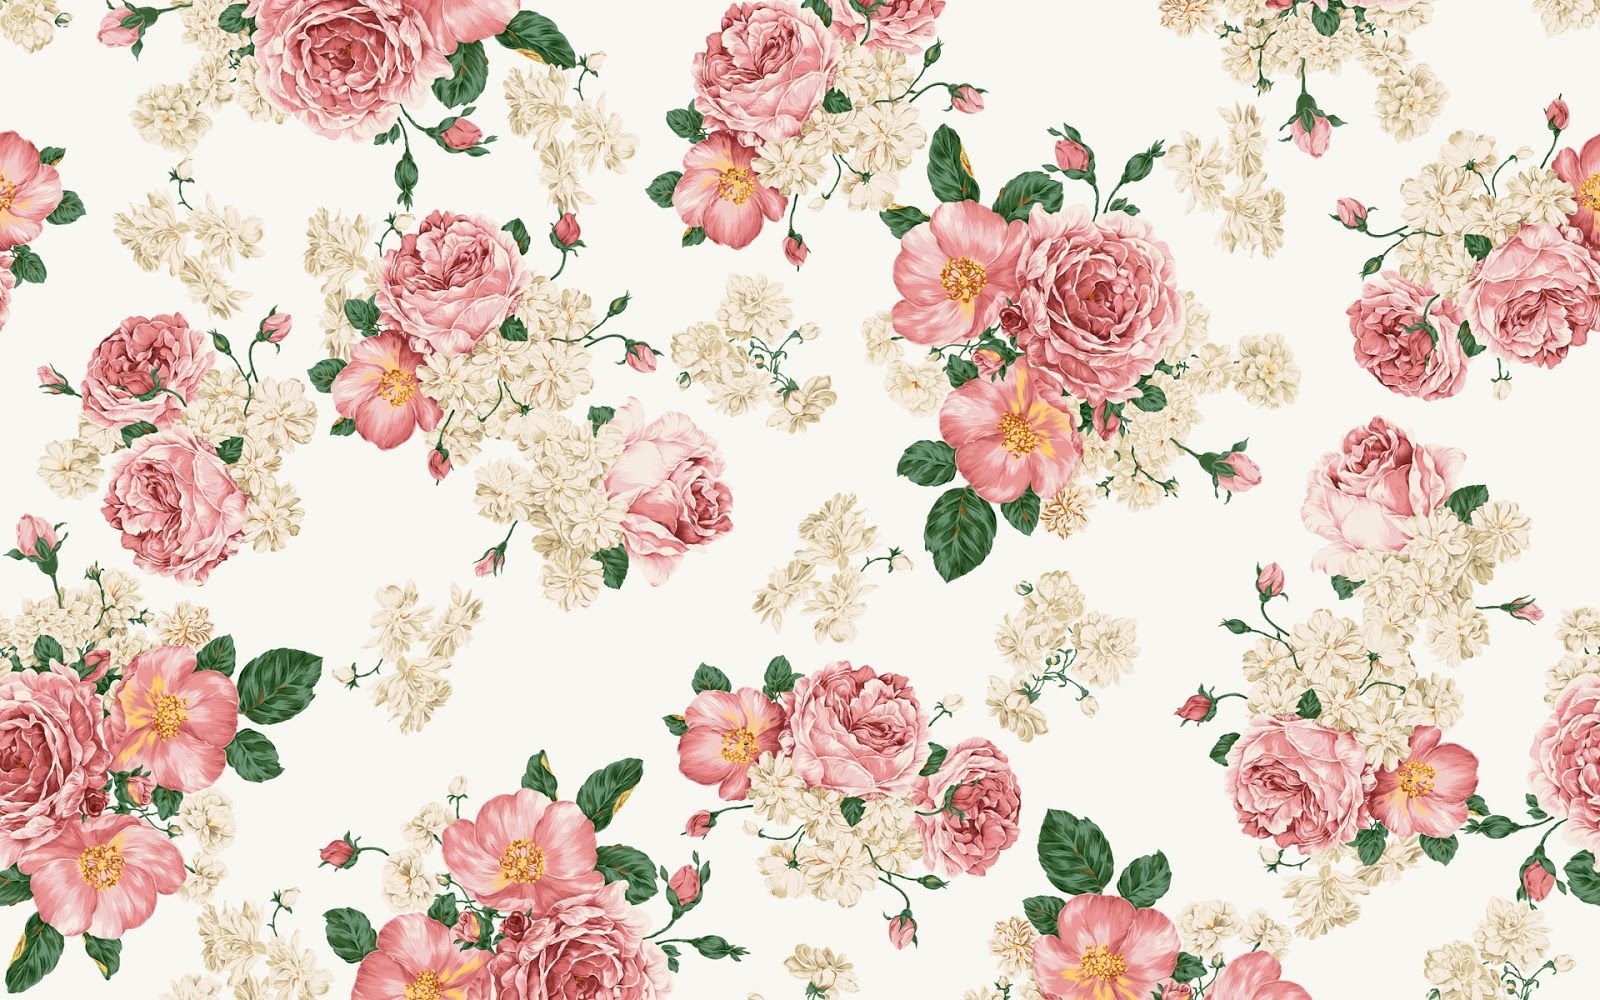 Vintage Floral Background Background for Free PowerPoint